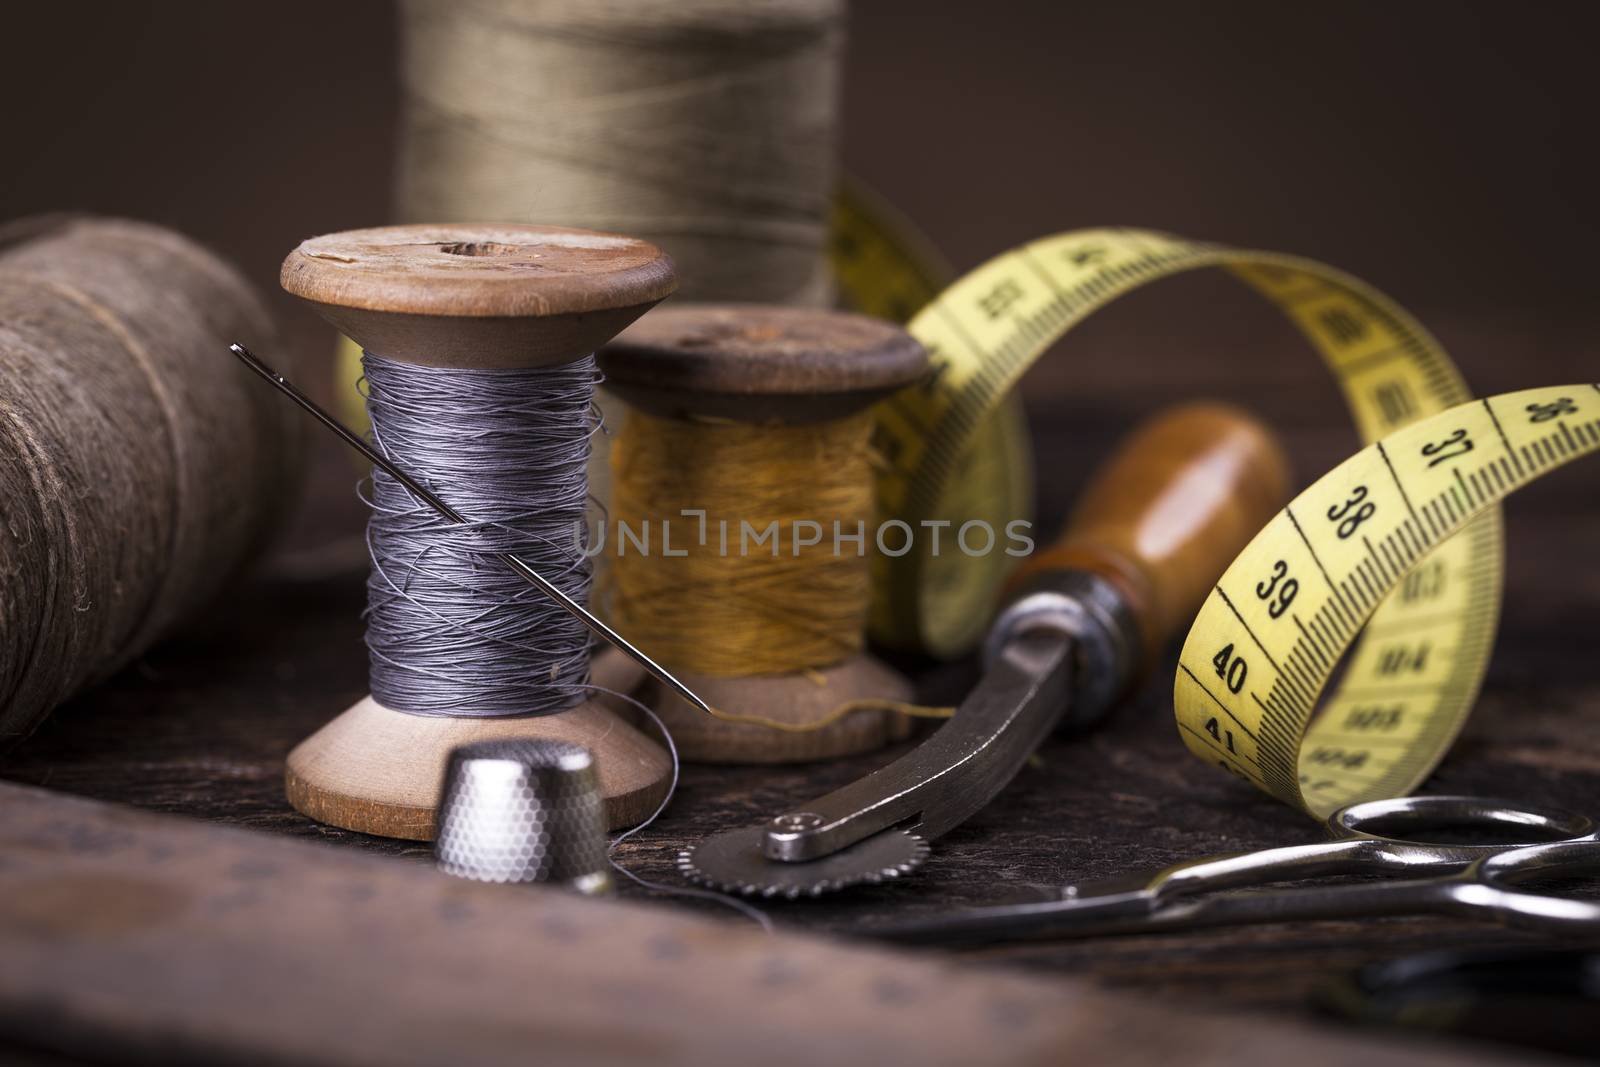 Sewing instruments, threads, needles in vintaae style by fikmik